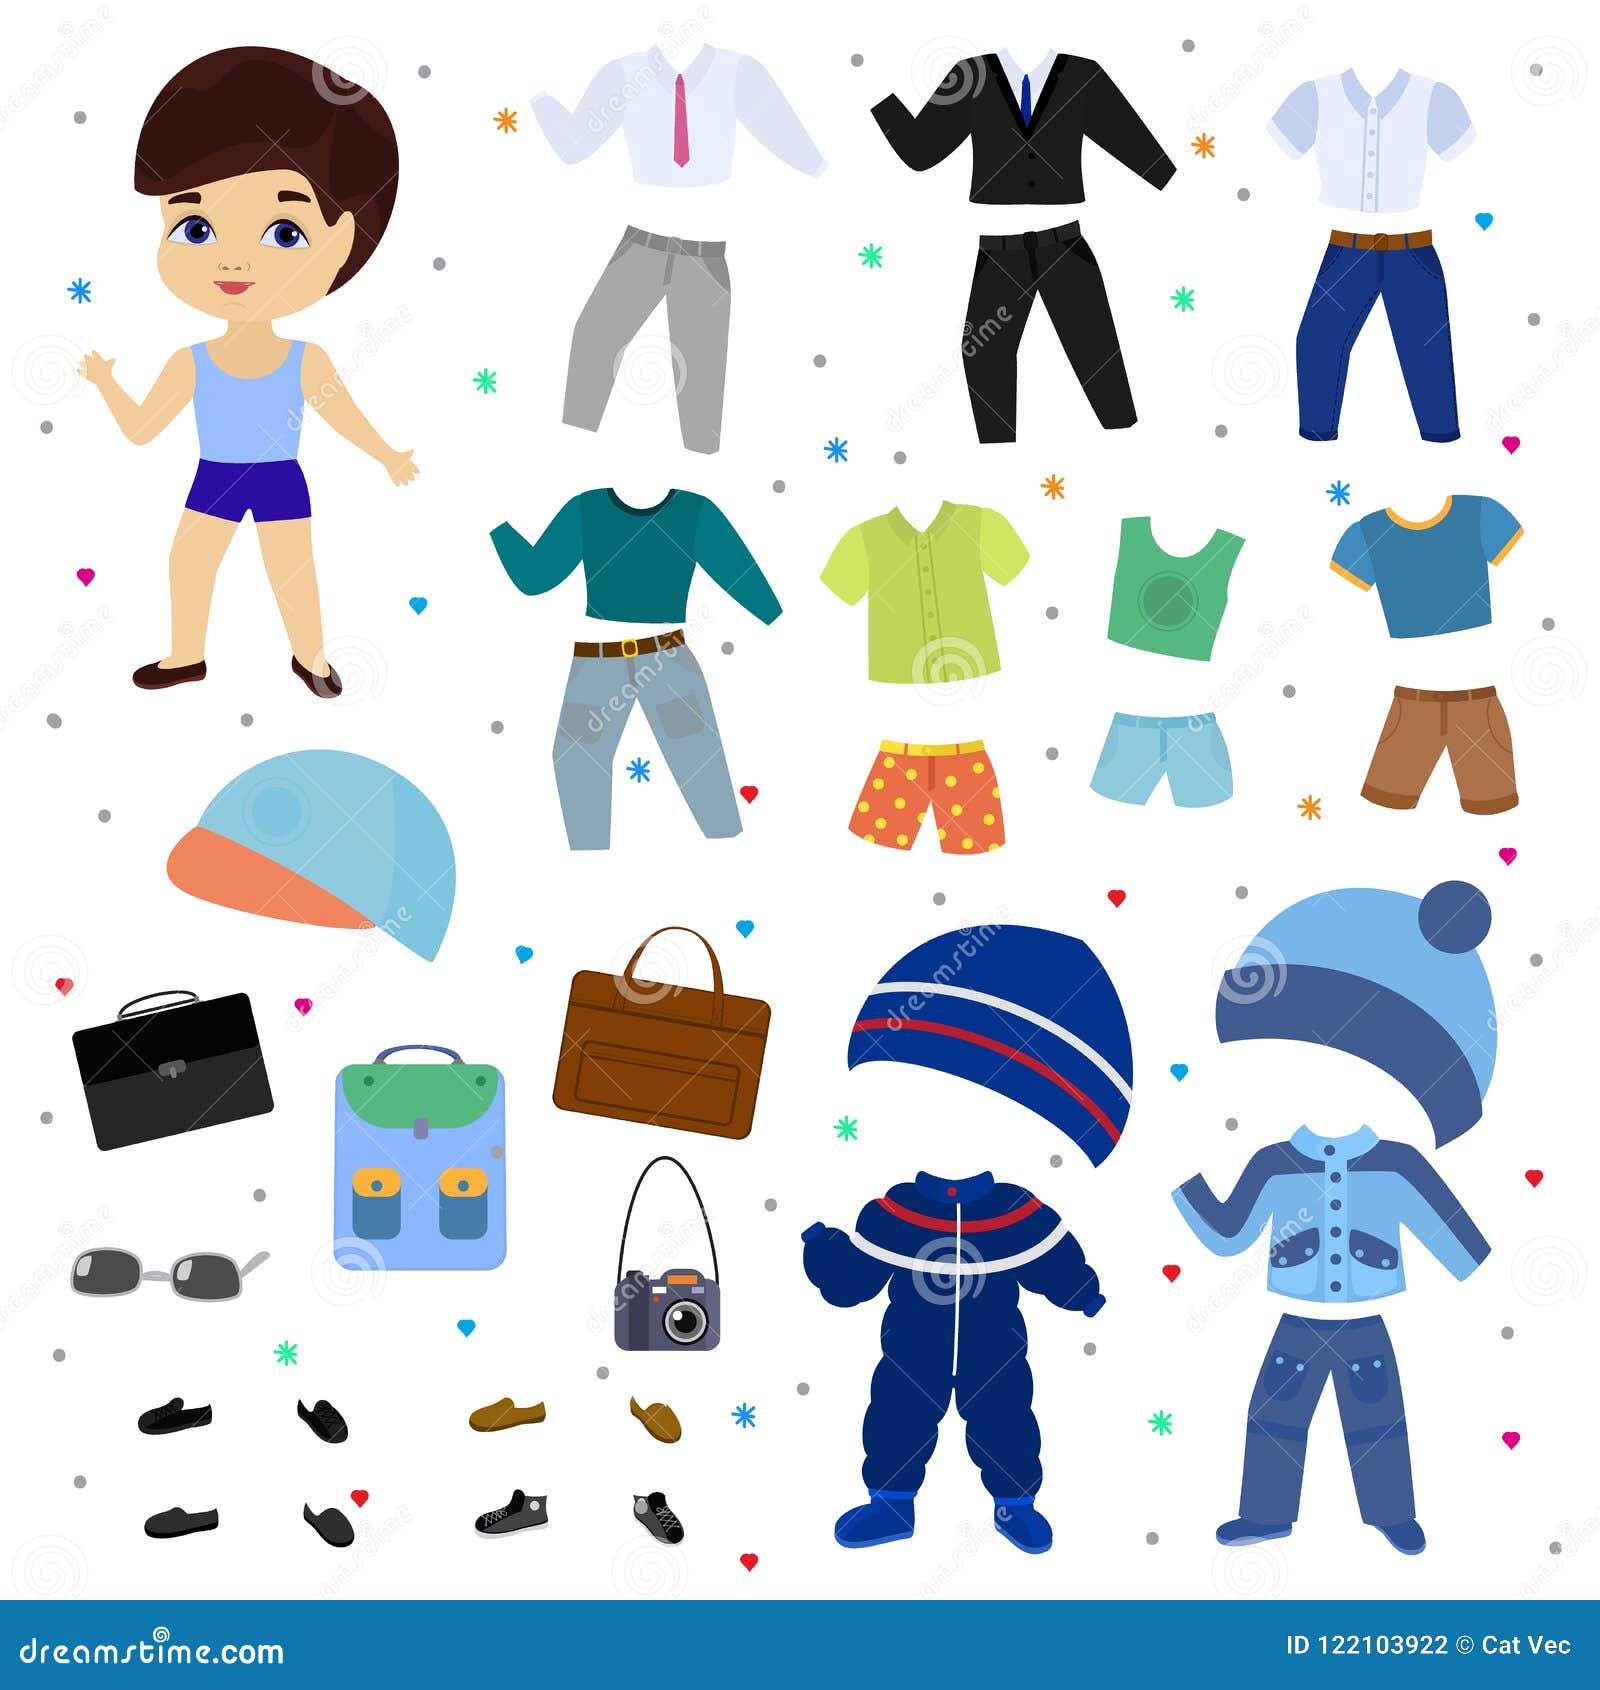 paper doll  boy dress up clothing with fashion pants or shoes  boyish set of male clothes for cutting